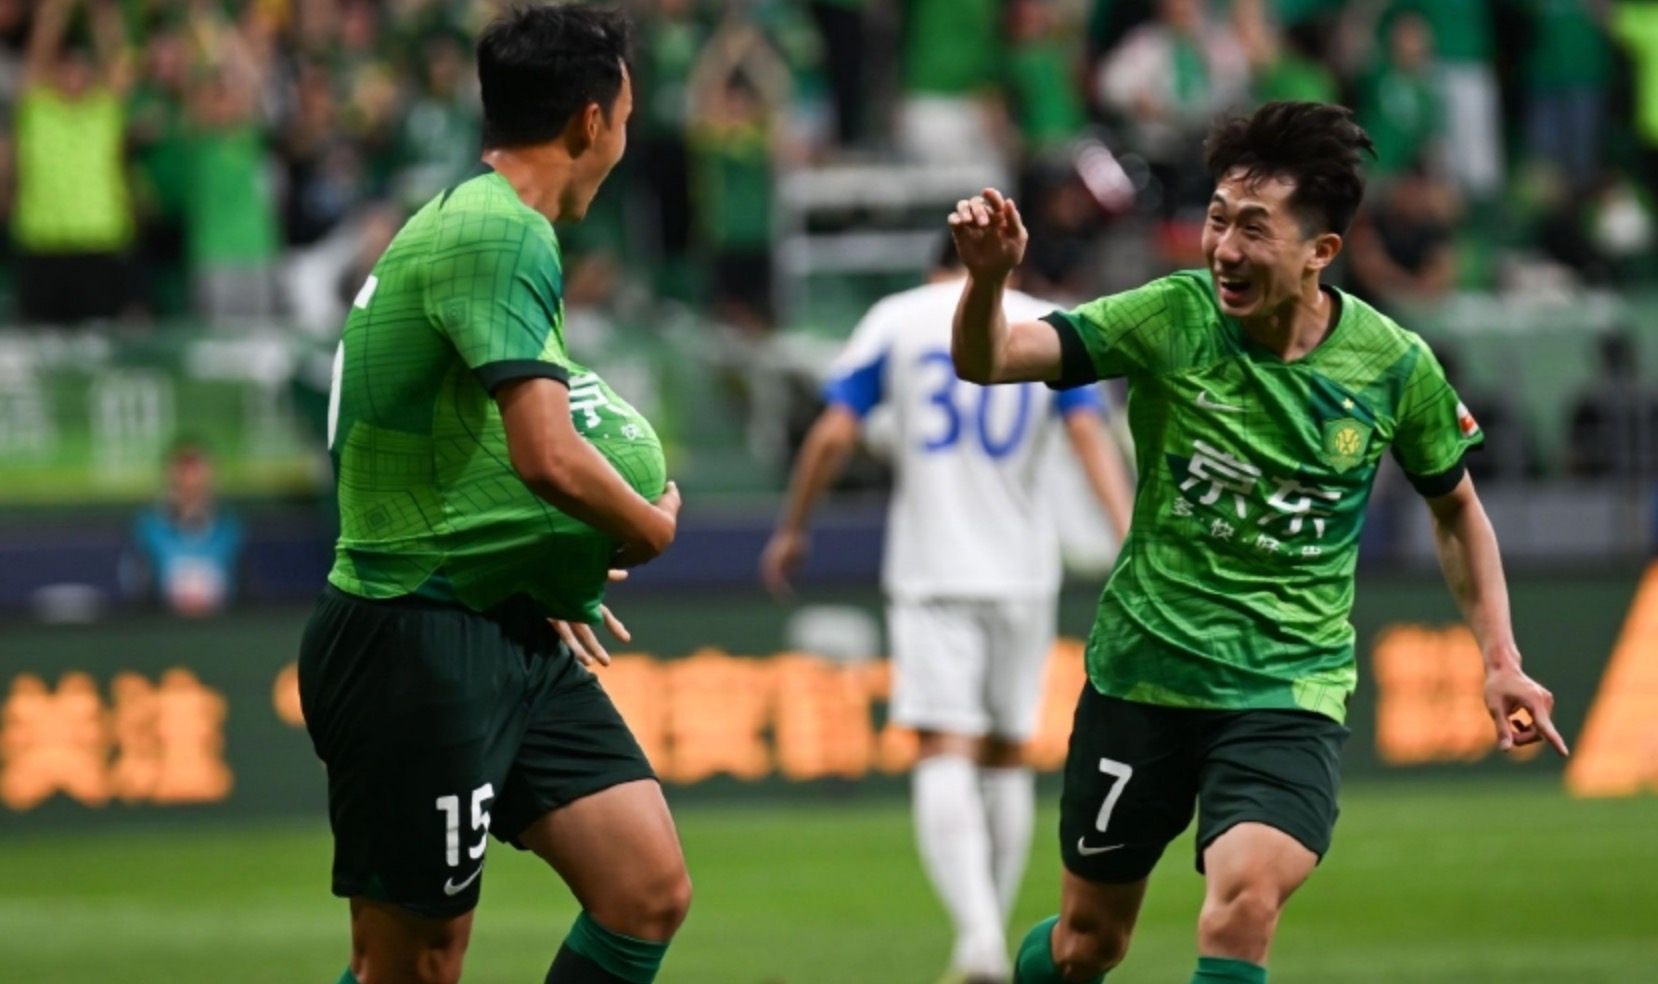 Beijing Guoan's Kang Sang-woo (R) reacts after notching an assist for Gao Tianyi (L) during their Chinese Super League clash with Cangzhou Mighty Lions at the new Workers' Stadium in Beijing, China, May 23, 2023. /Beijing Guoan